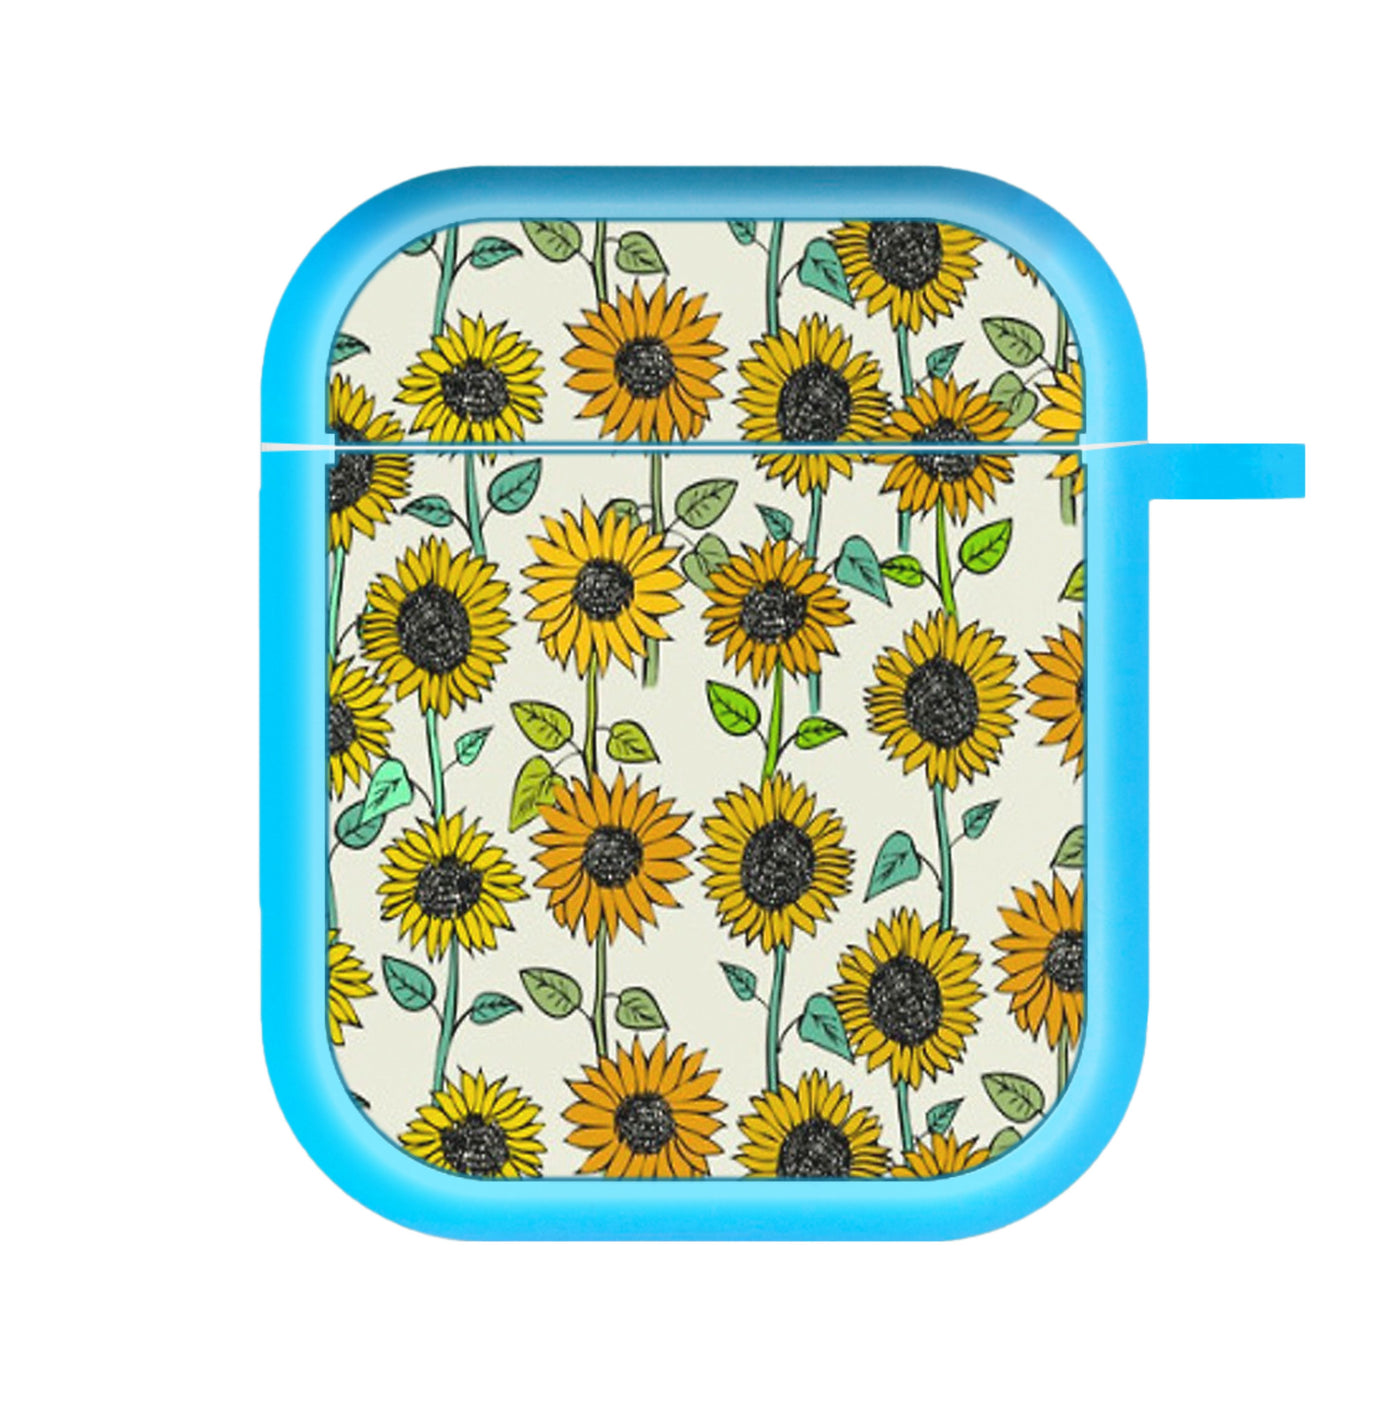 Painted Sunflowers AirPods Case